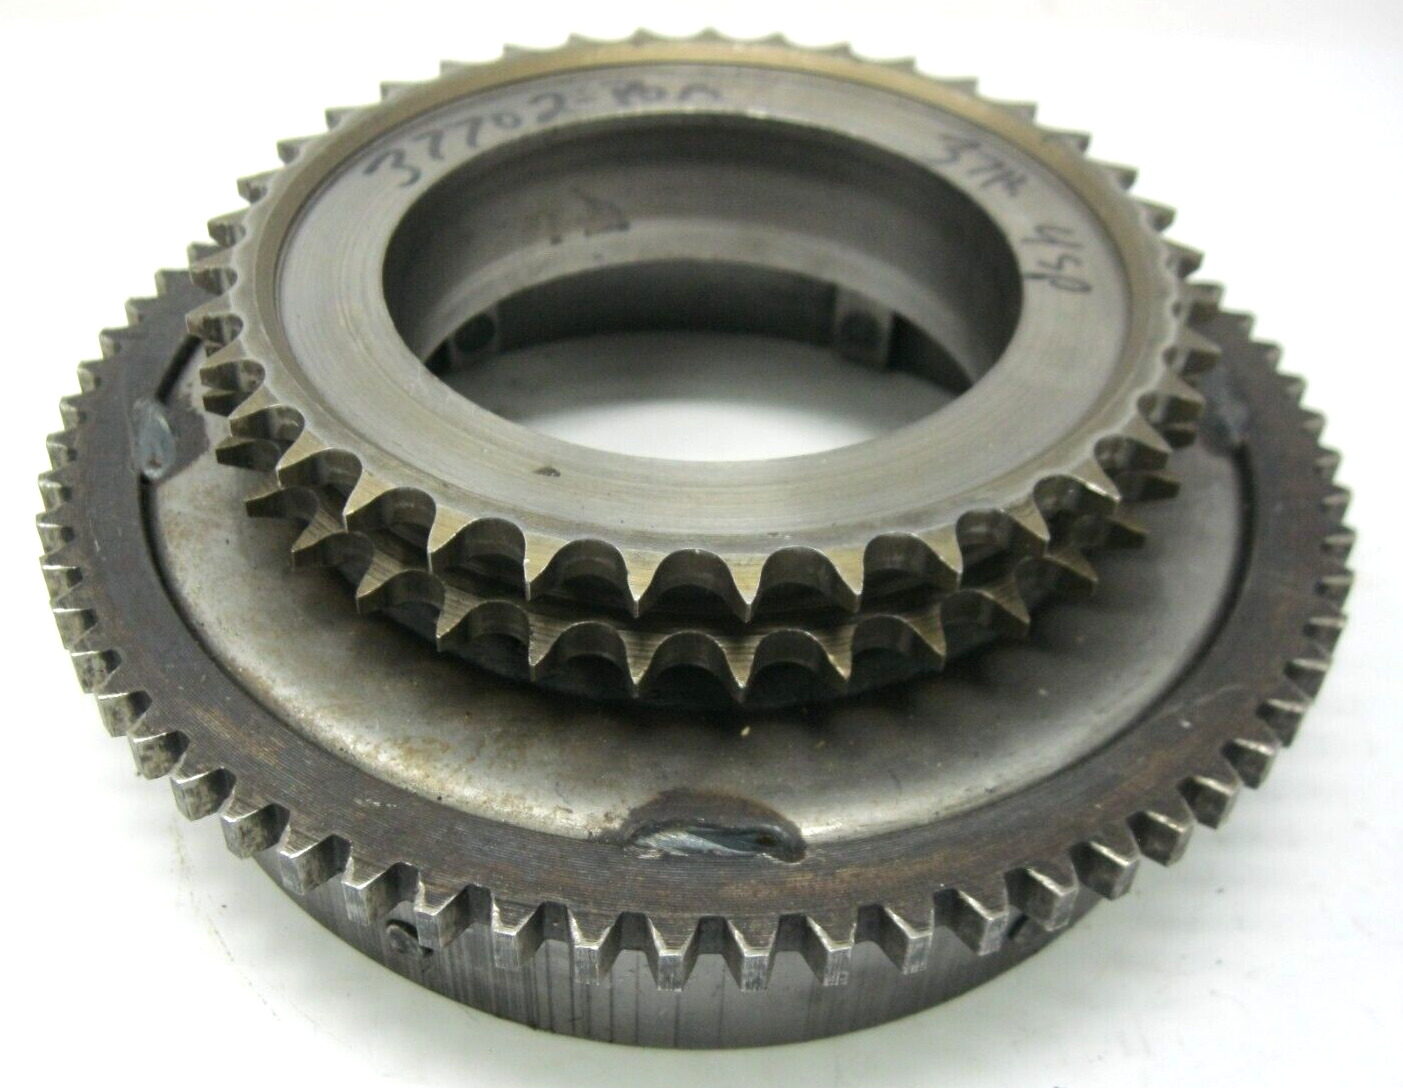 37 Tooth Clutch Basket c/w Starter Ring Gear for 80-84 Harley-Davidson 37702-70A